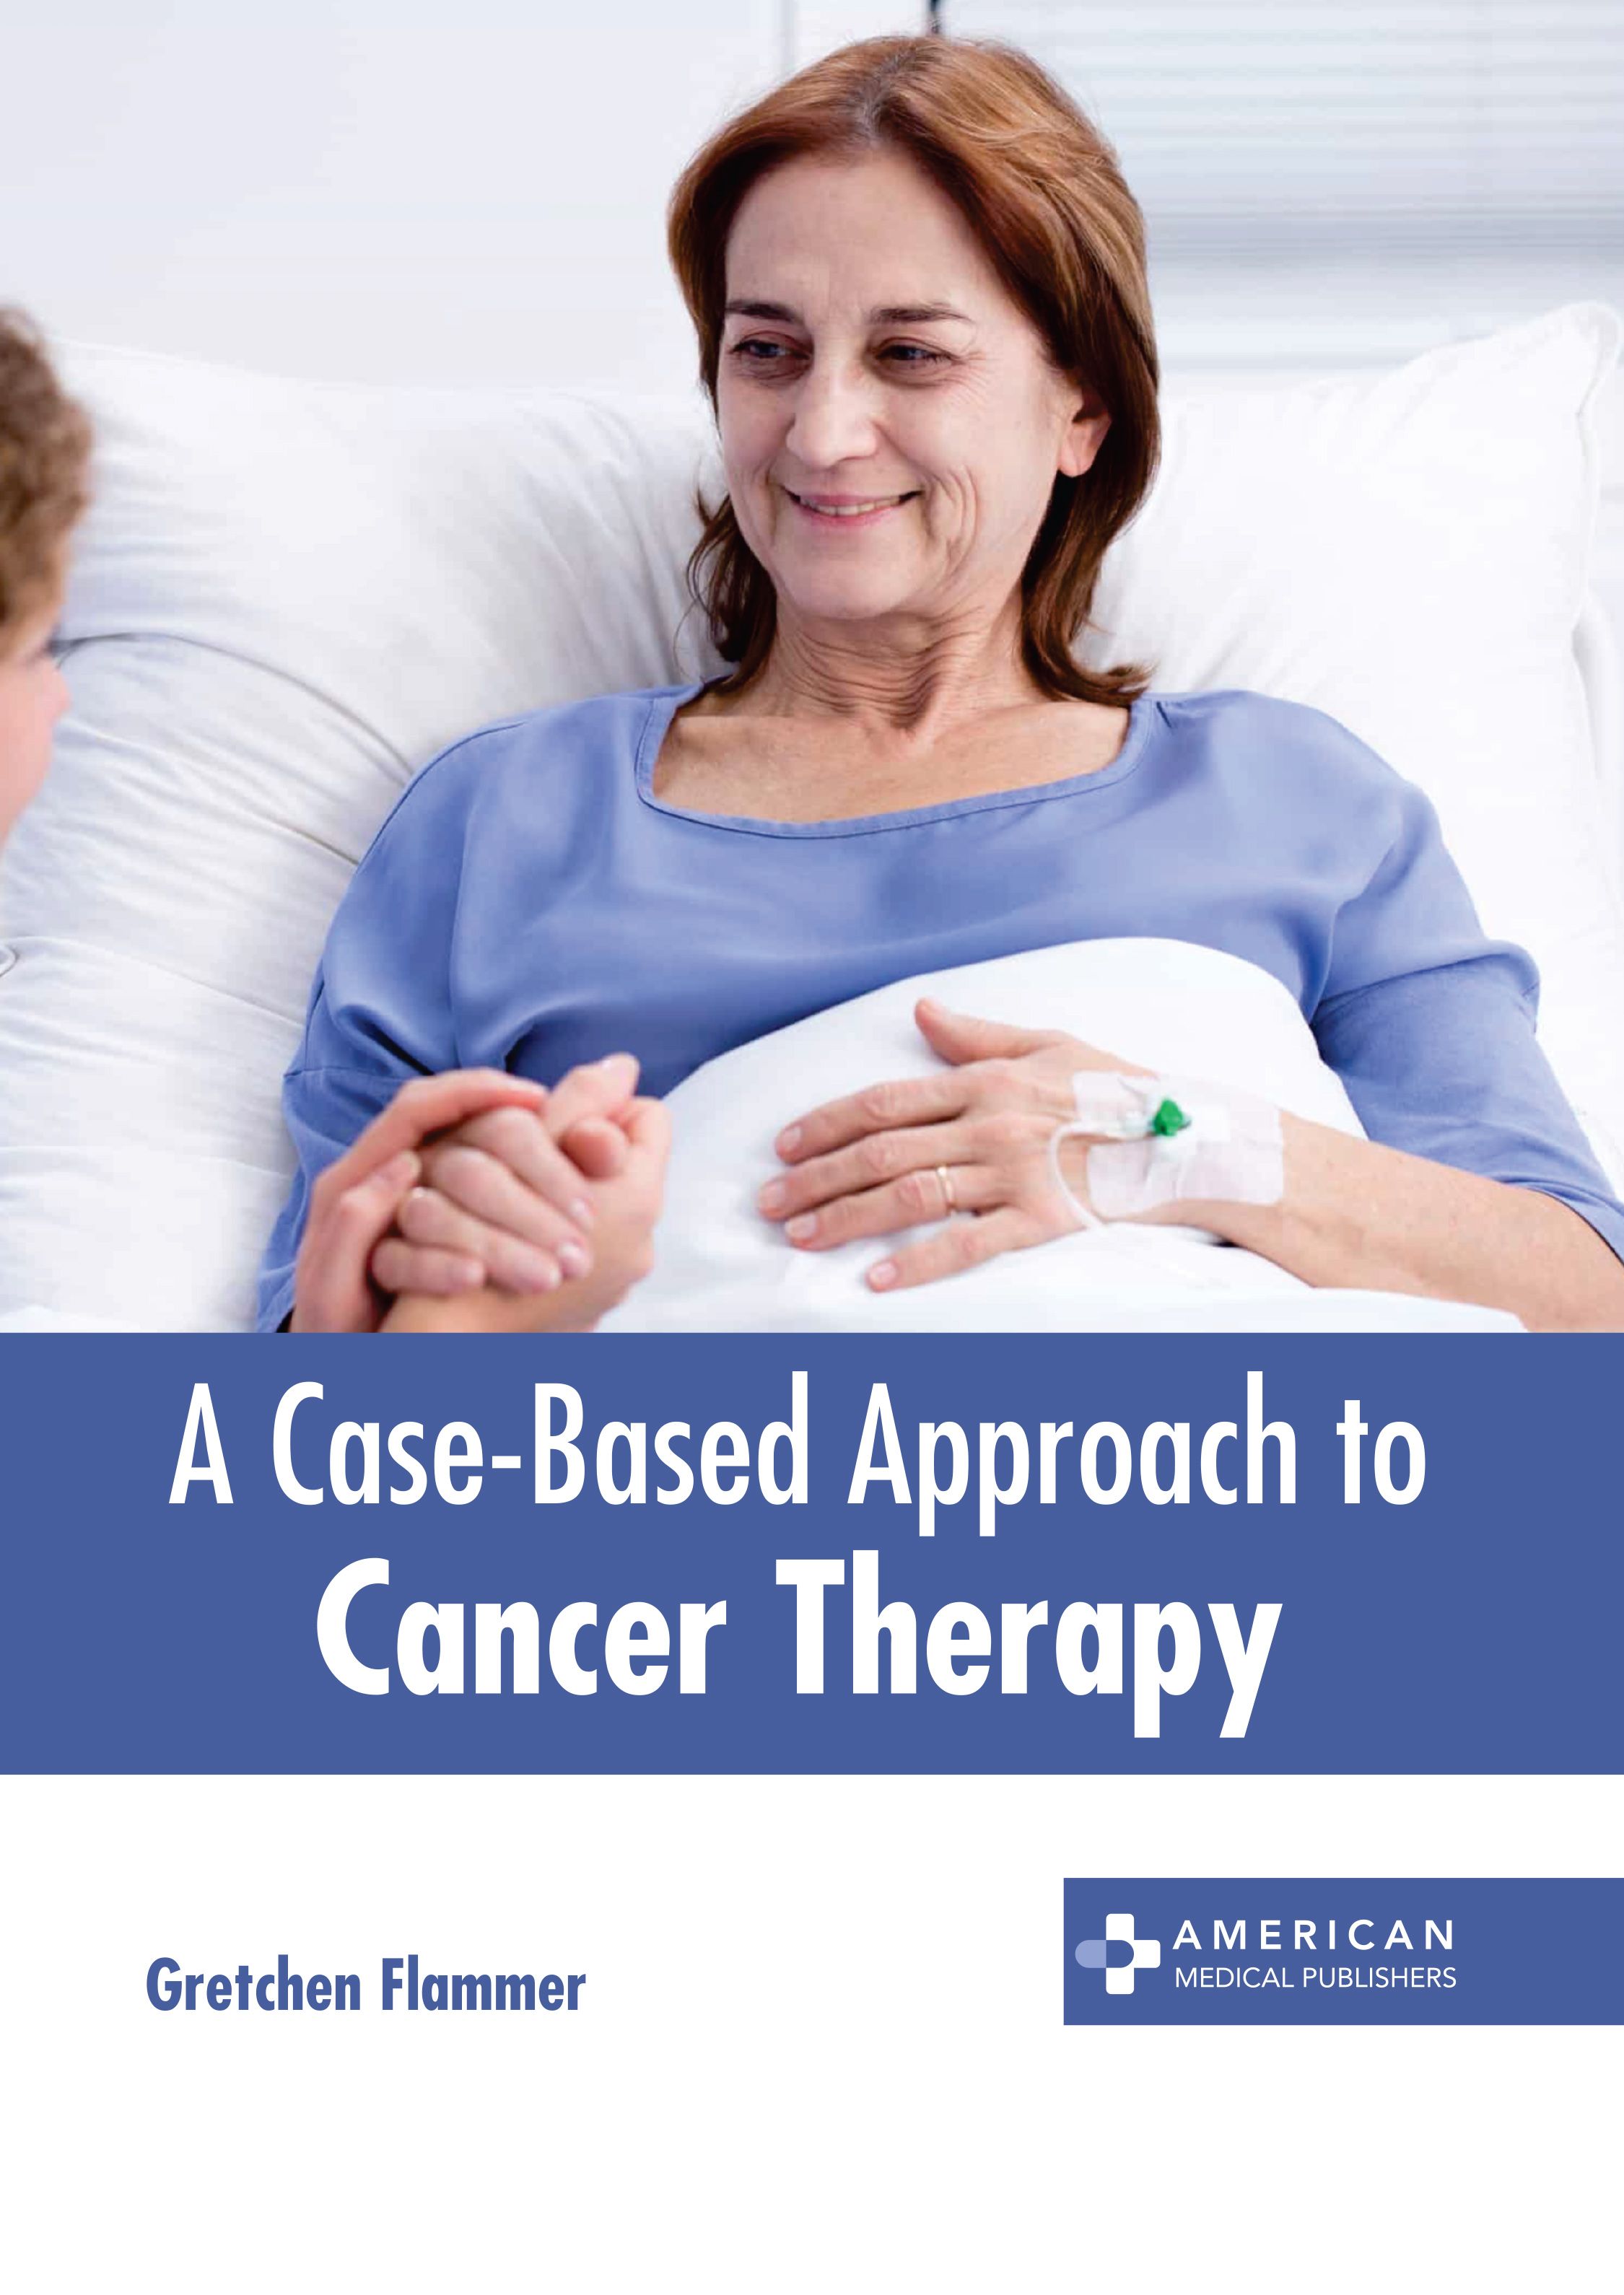 A CASE-BASED APPROACH TO CANCER THERAPY